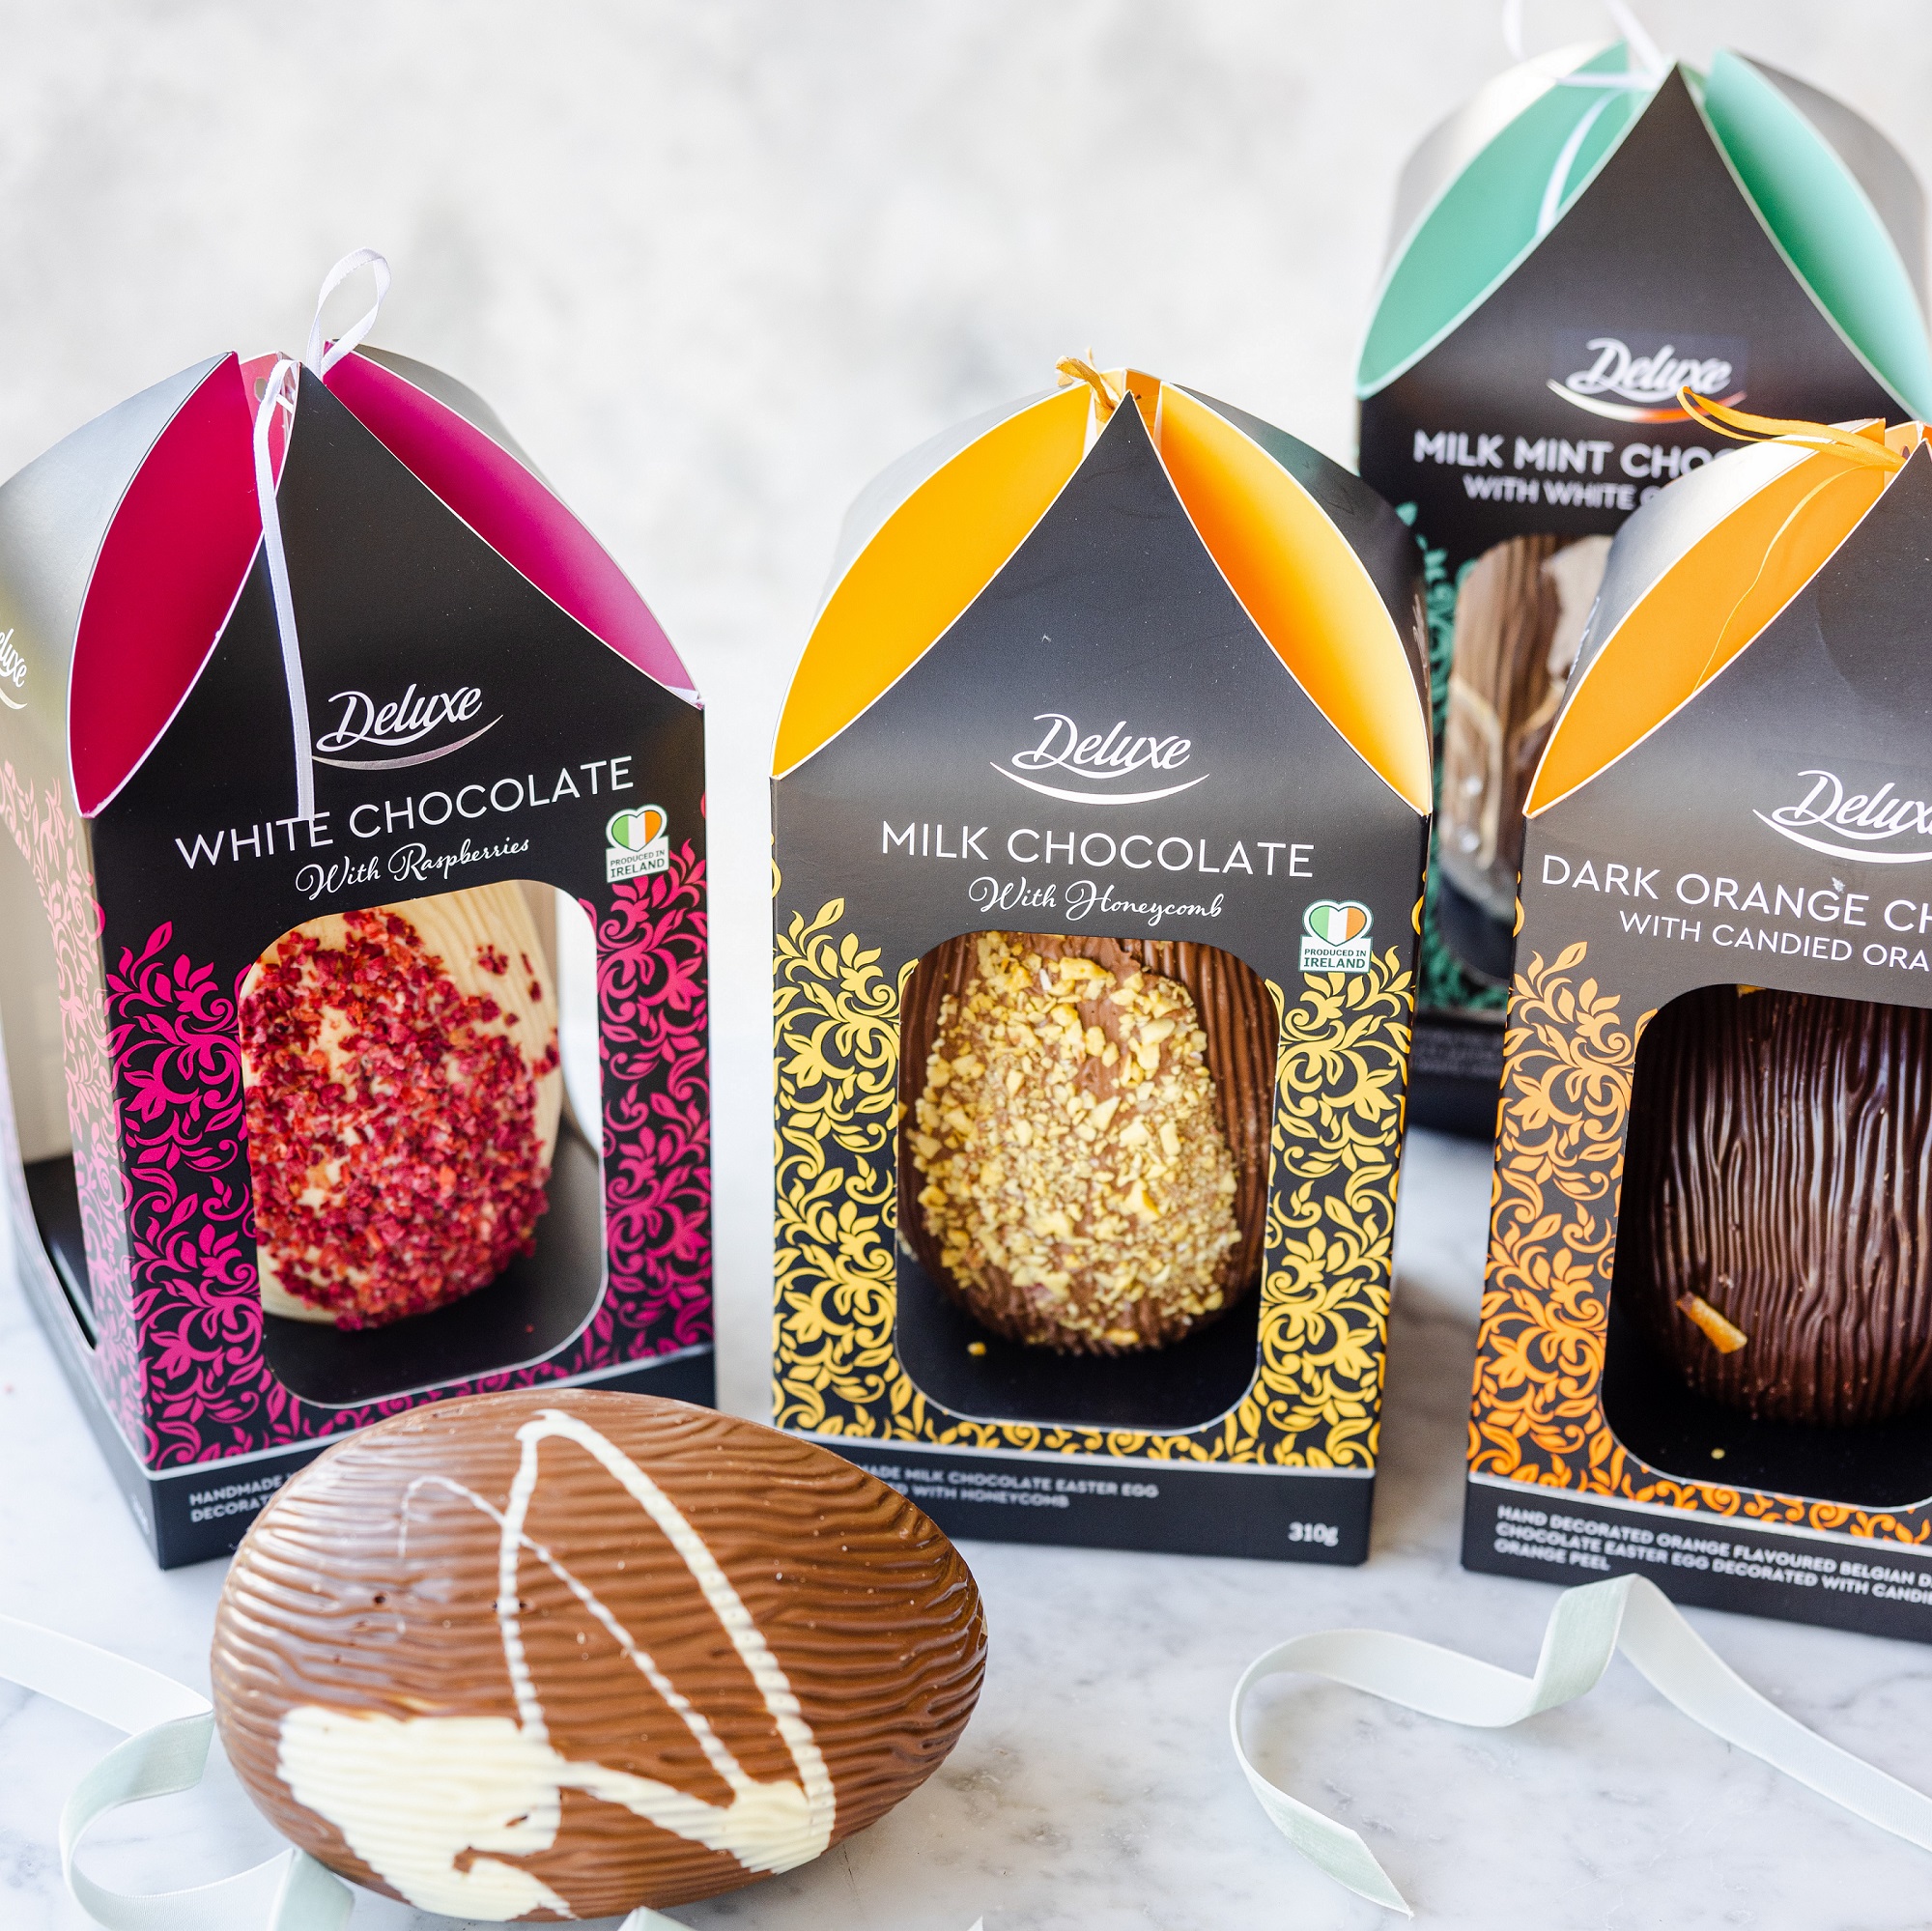 Lidl Northern Ireland’s handmade chocolate Easter eggs return with new